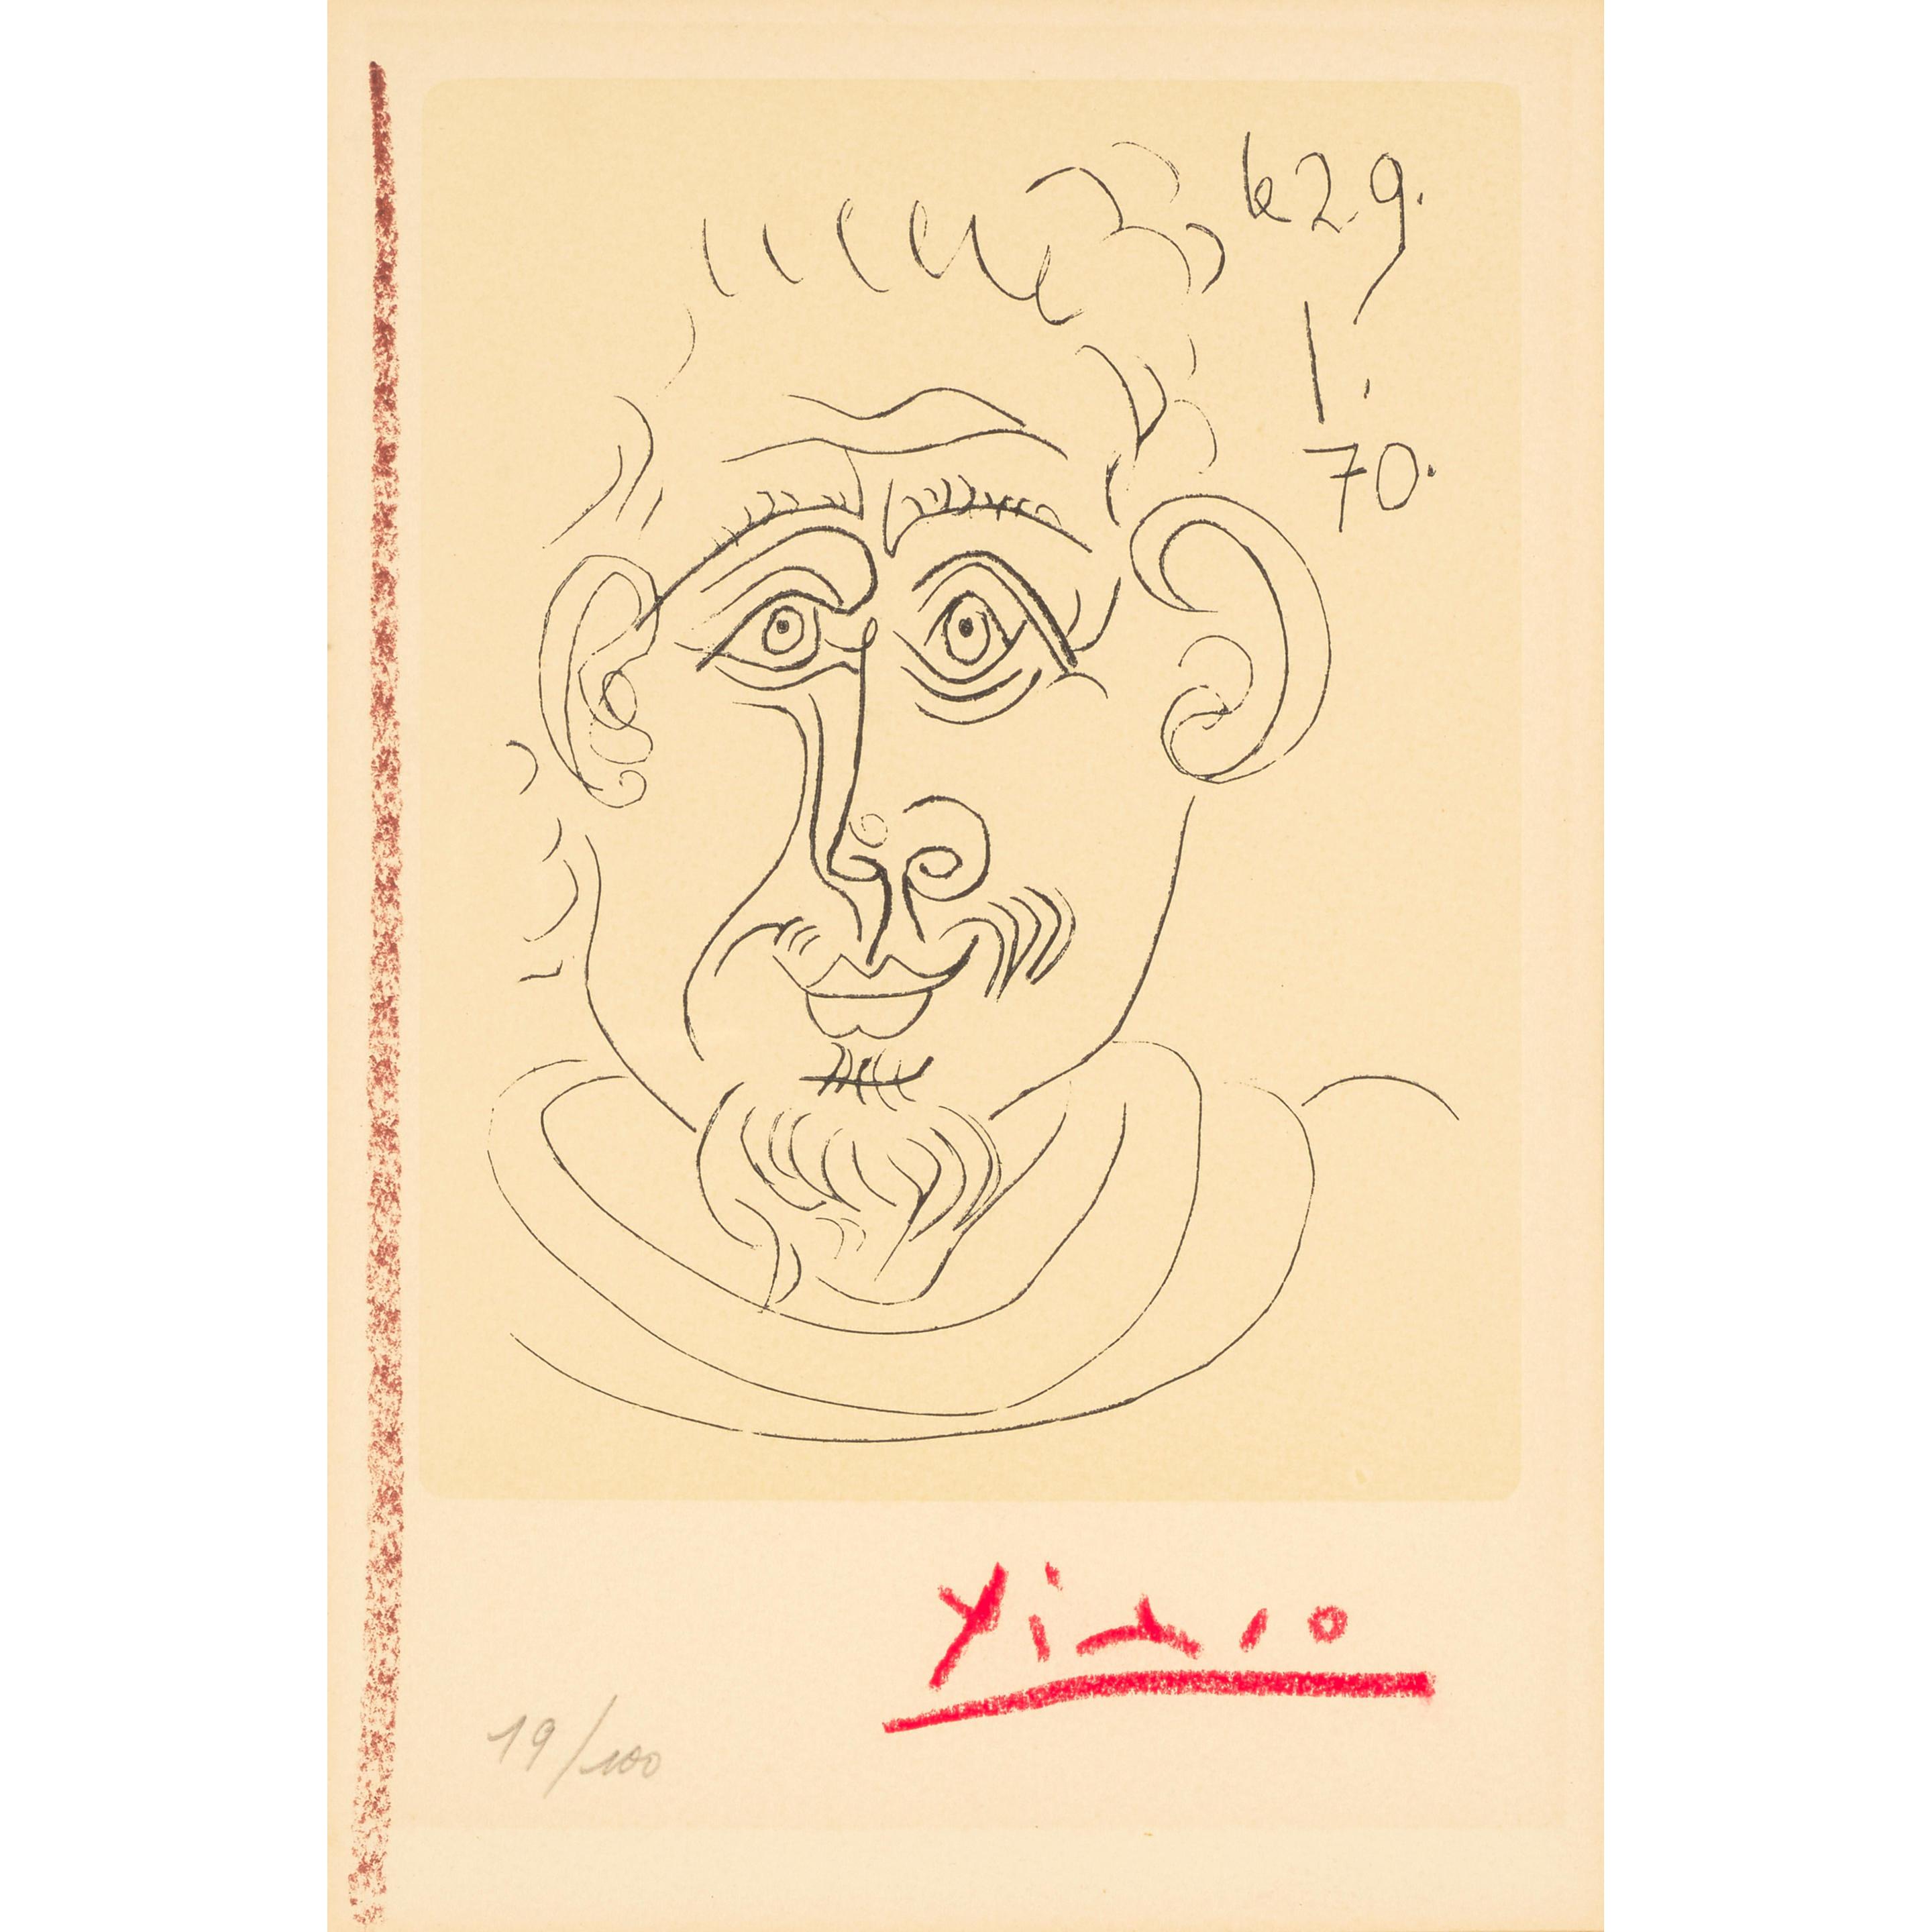 Tête d'homme au bouc (Head of a Man with Goatee) by Pablo Picasso